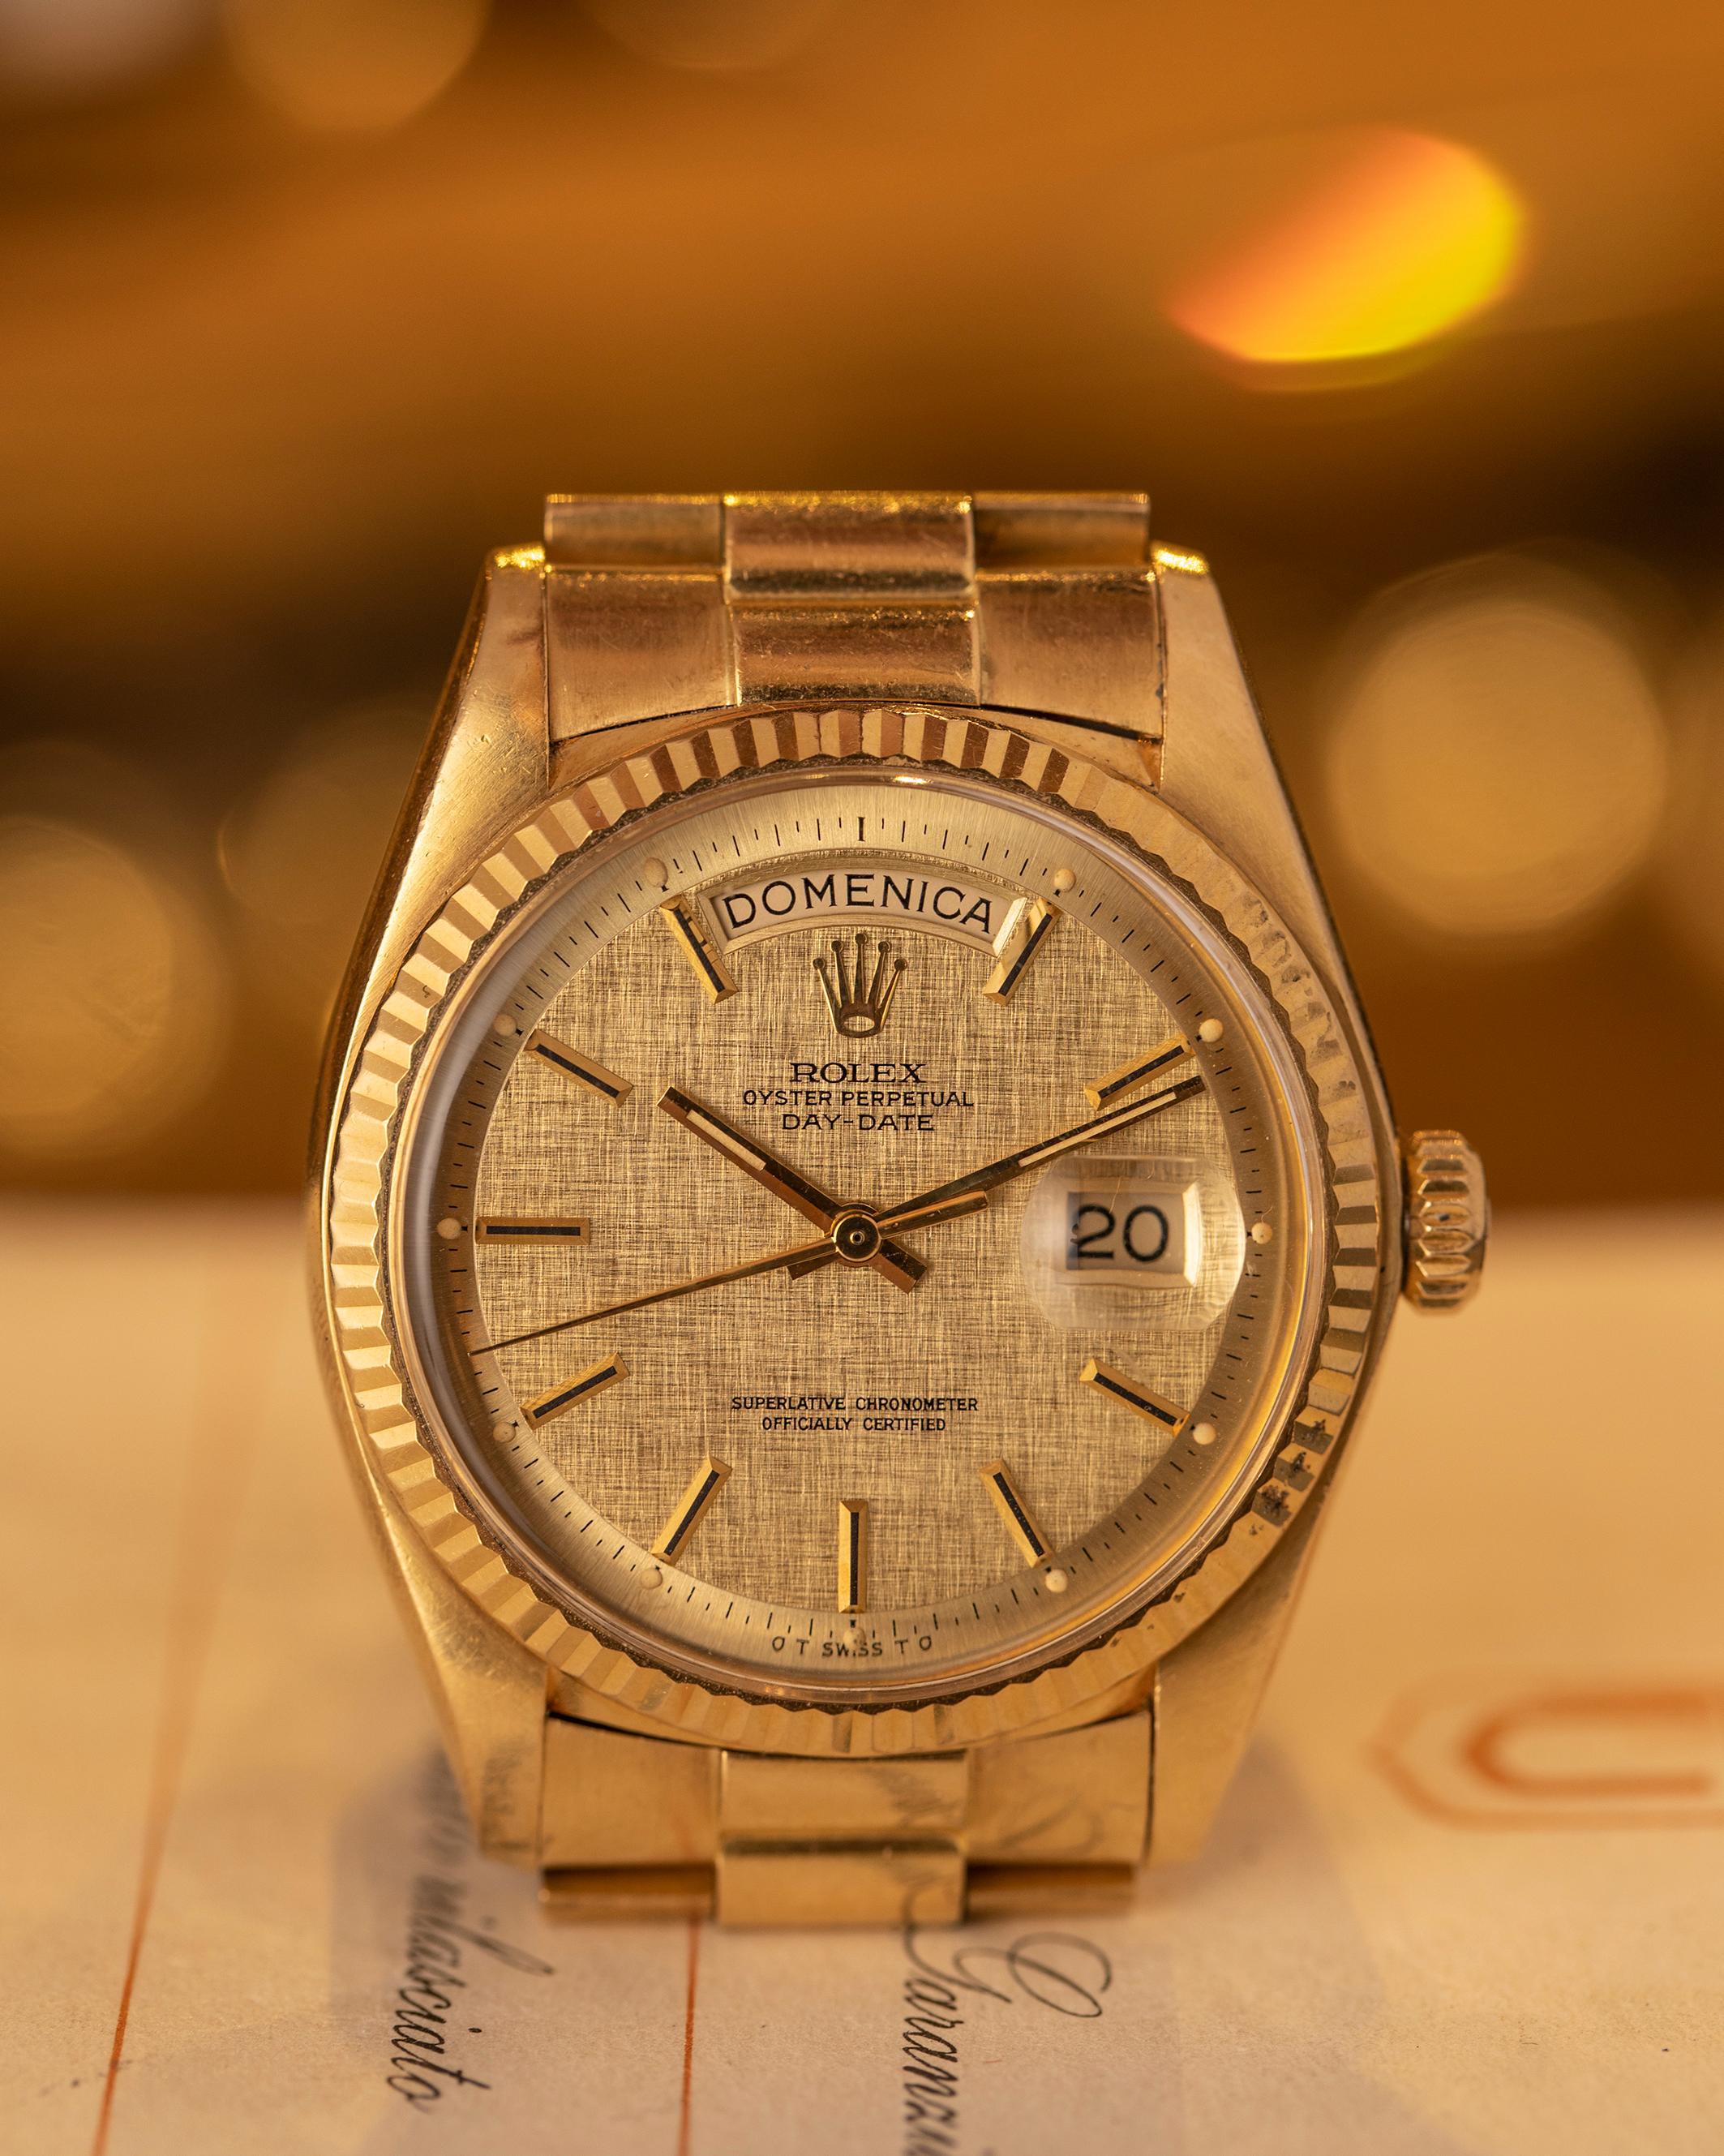 Ref.1803

Case: 18 kt yellow gold in three parts, screw back and crown. Engraved bezel in stunning condition. The watch comes with its original 18kt yellow gold Rolex bracelet.

Dial: original champagne Linen dial with black graphics with special σ